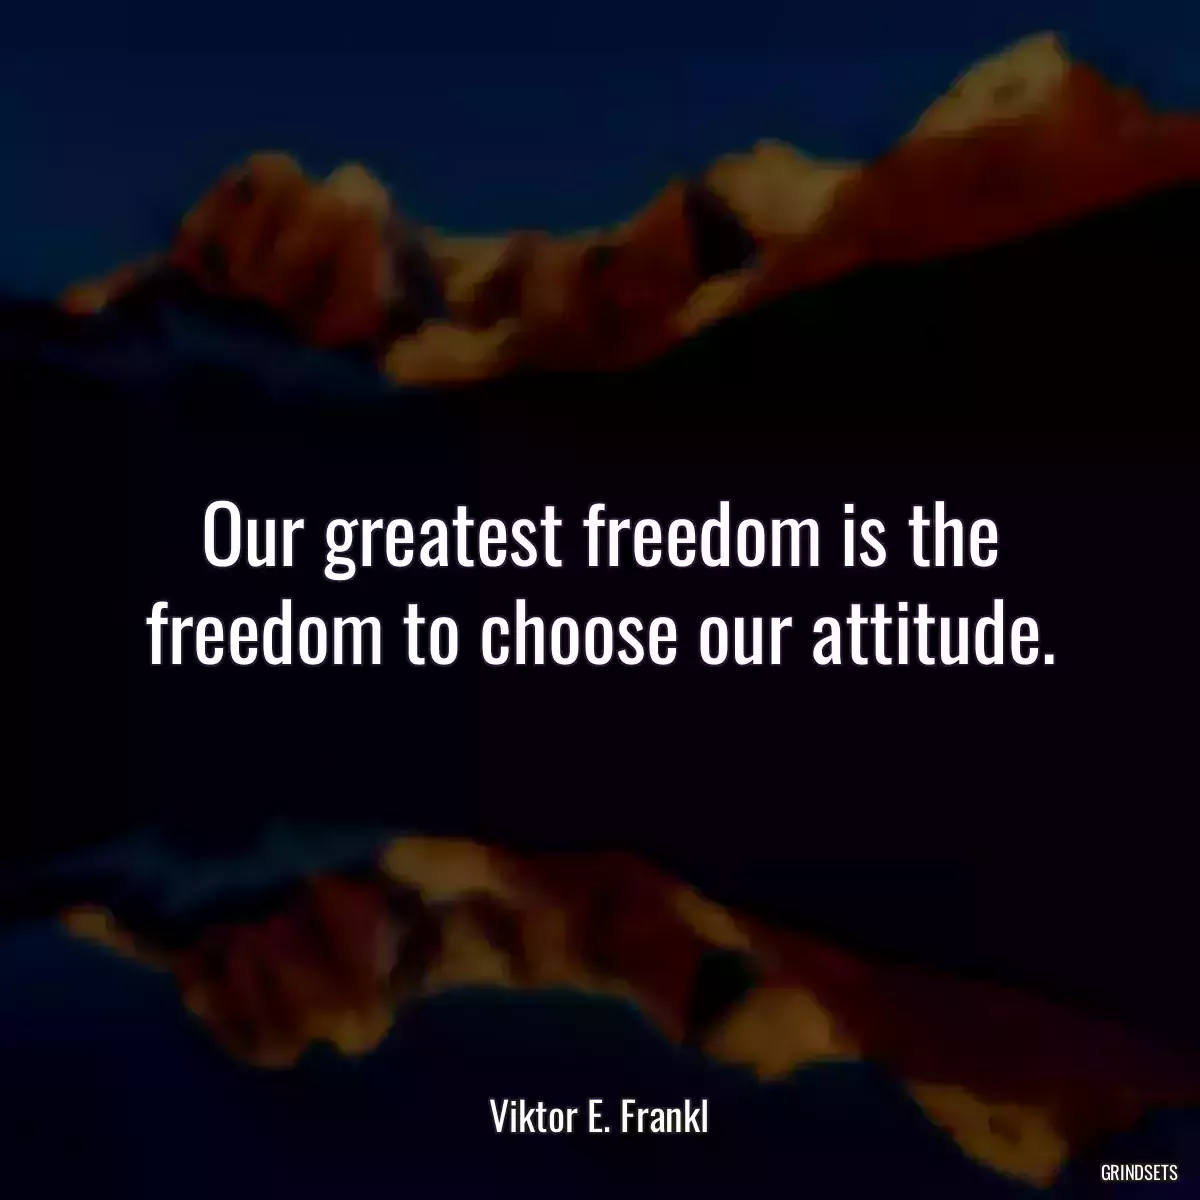 Our greatest freedom is the freedom to choose our attitude.